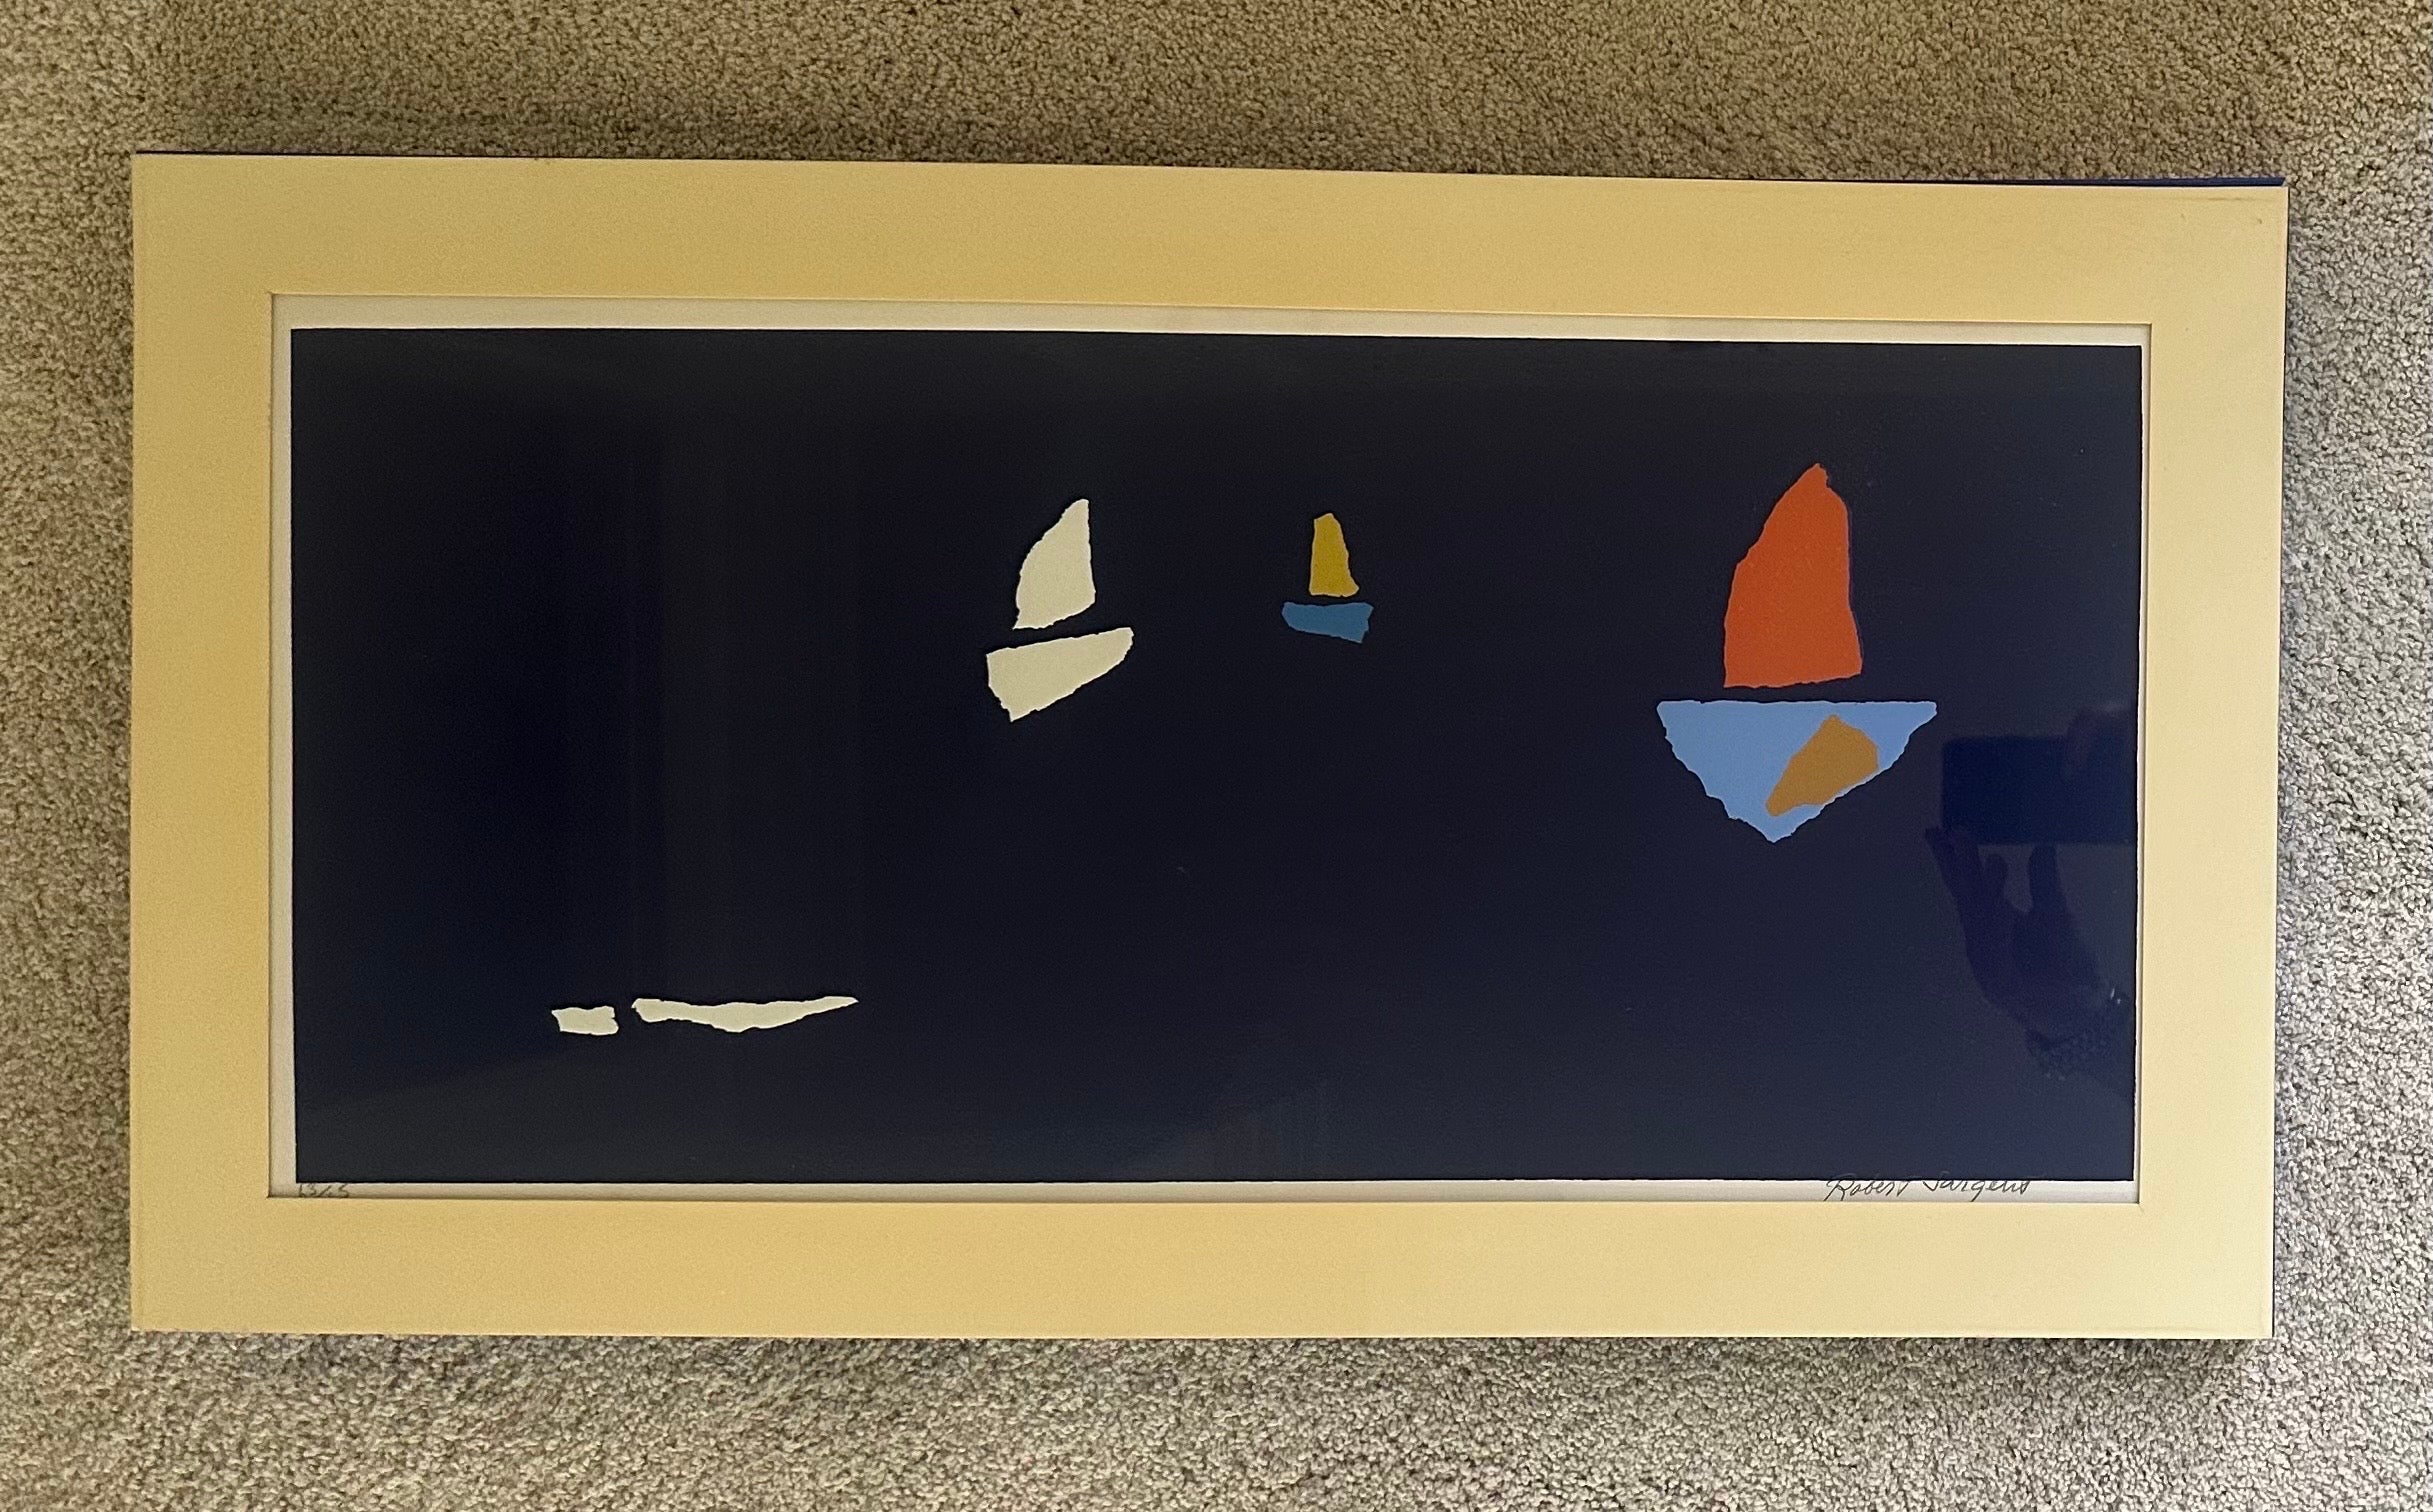 Abstract Geometric Serigraph of Sailboats on the Horizon by Robert Sargent For Sale 1